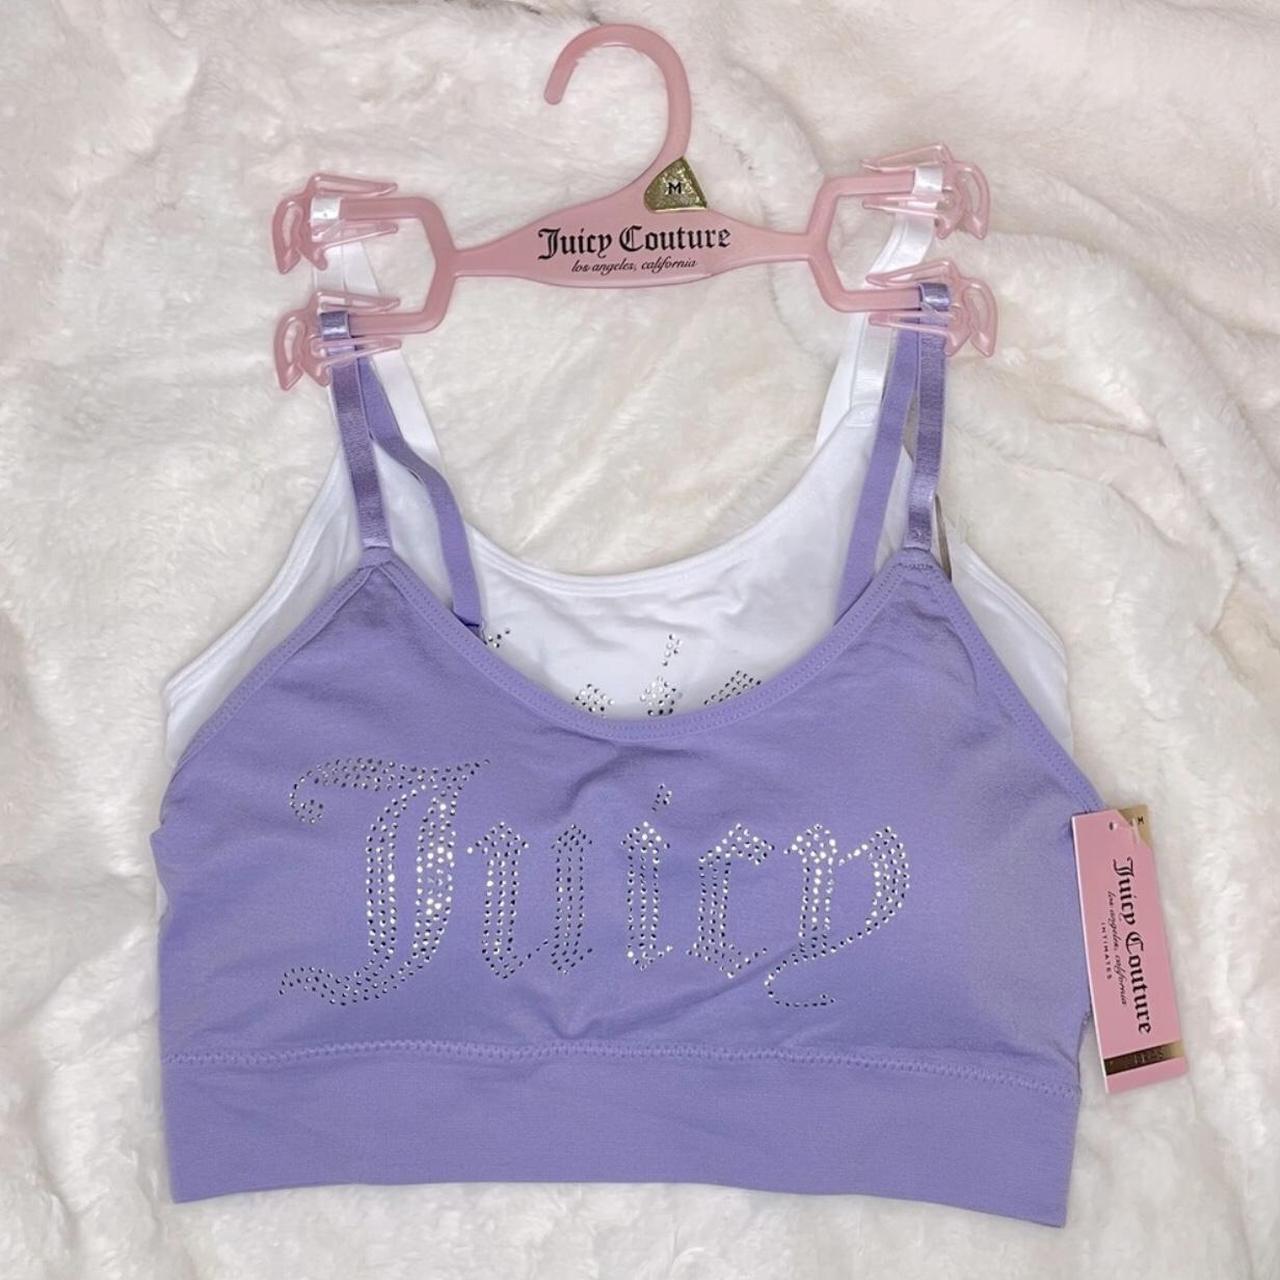 Juicy couture Sport shimmer bra